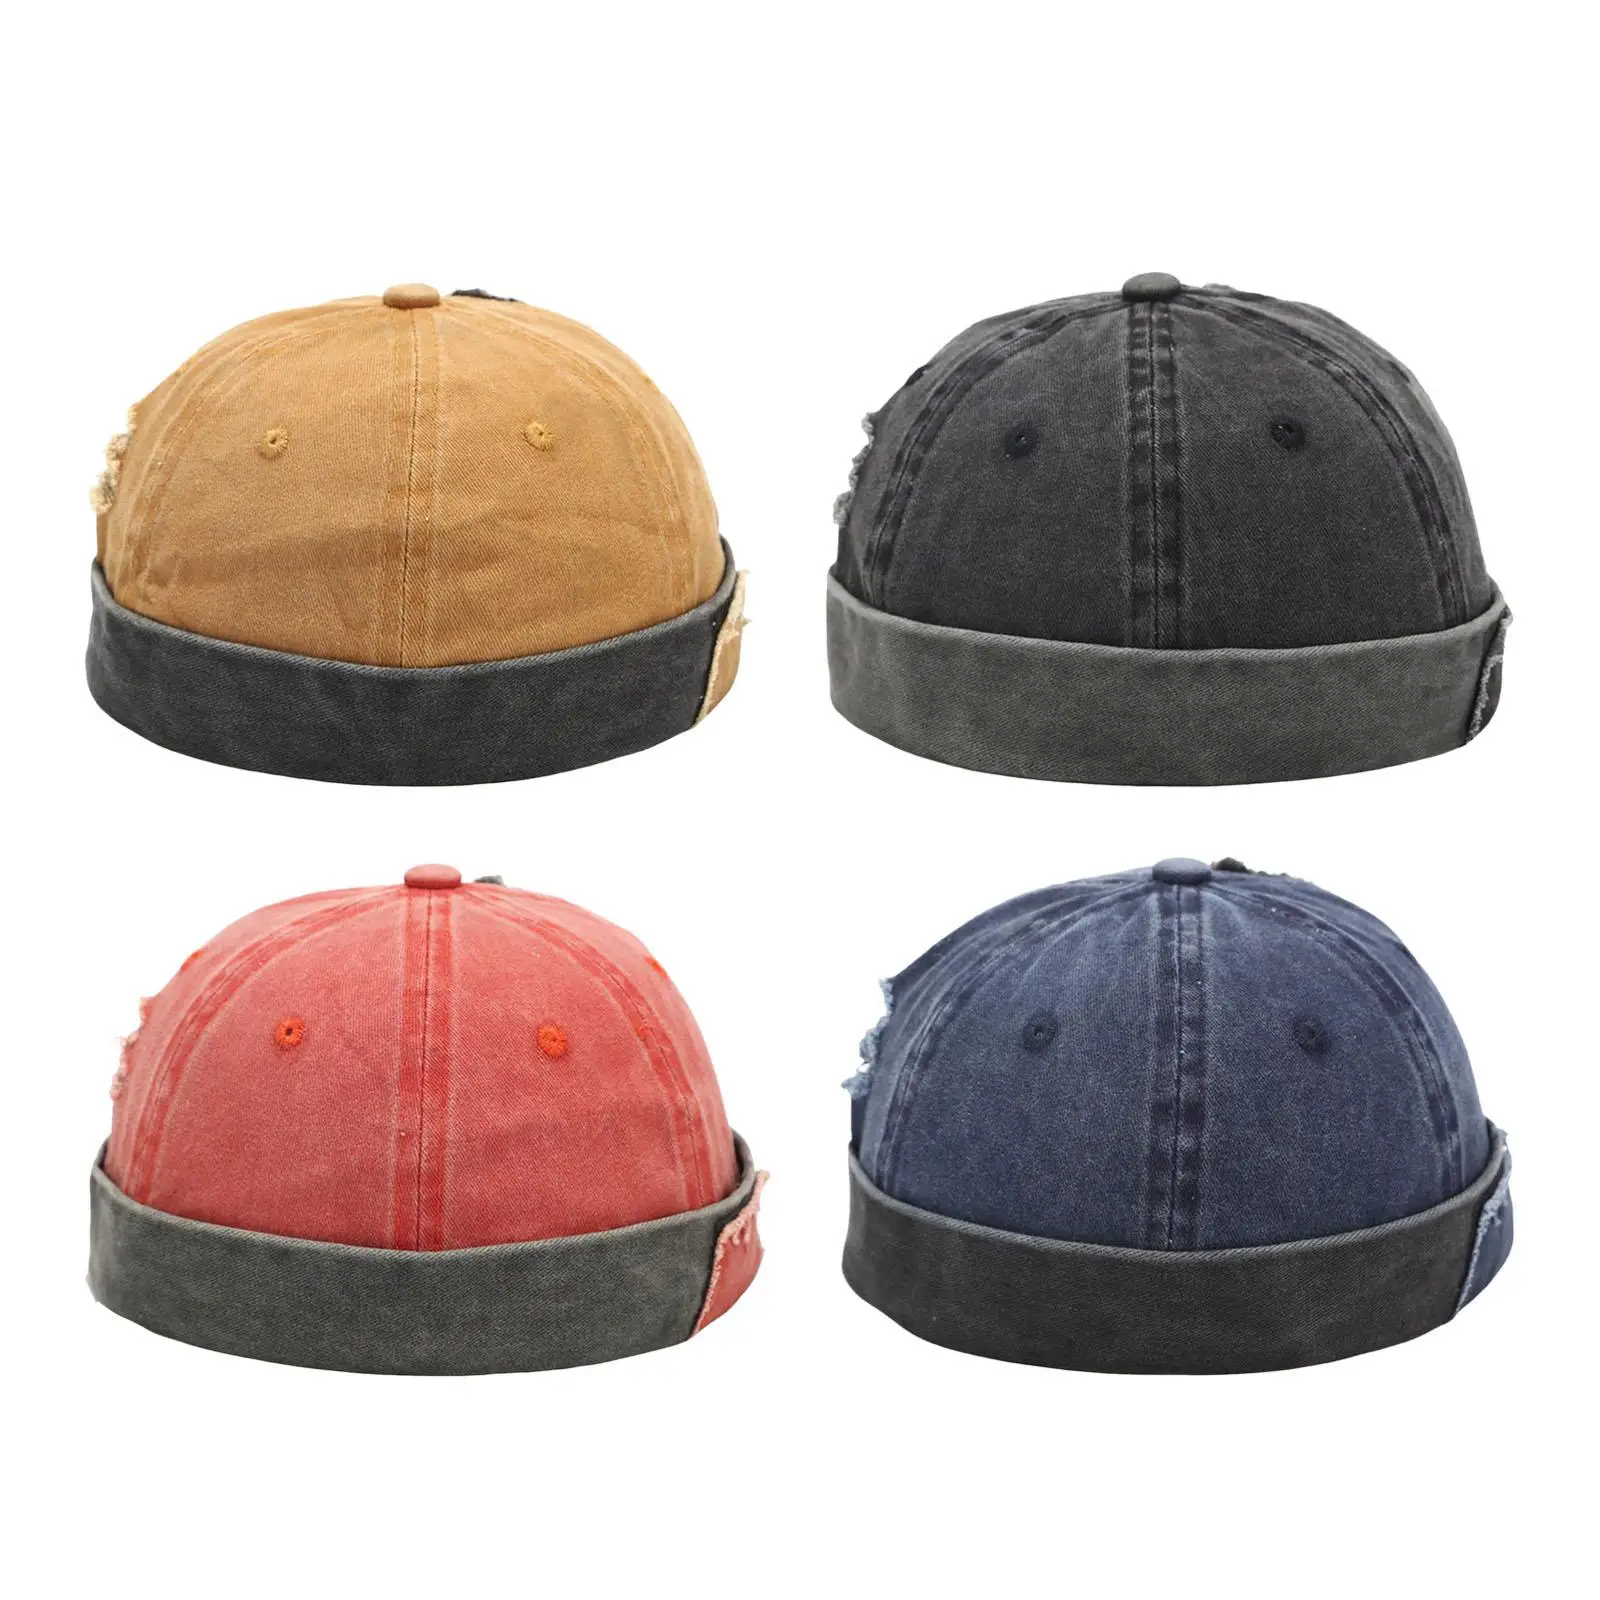 Brimless Hat Street Style Skull Caps Adjustable Casual for Worker Sailor Fisherman